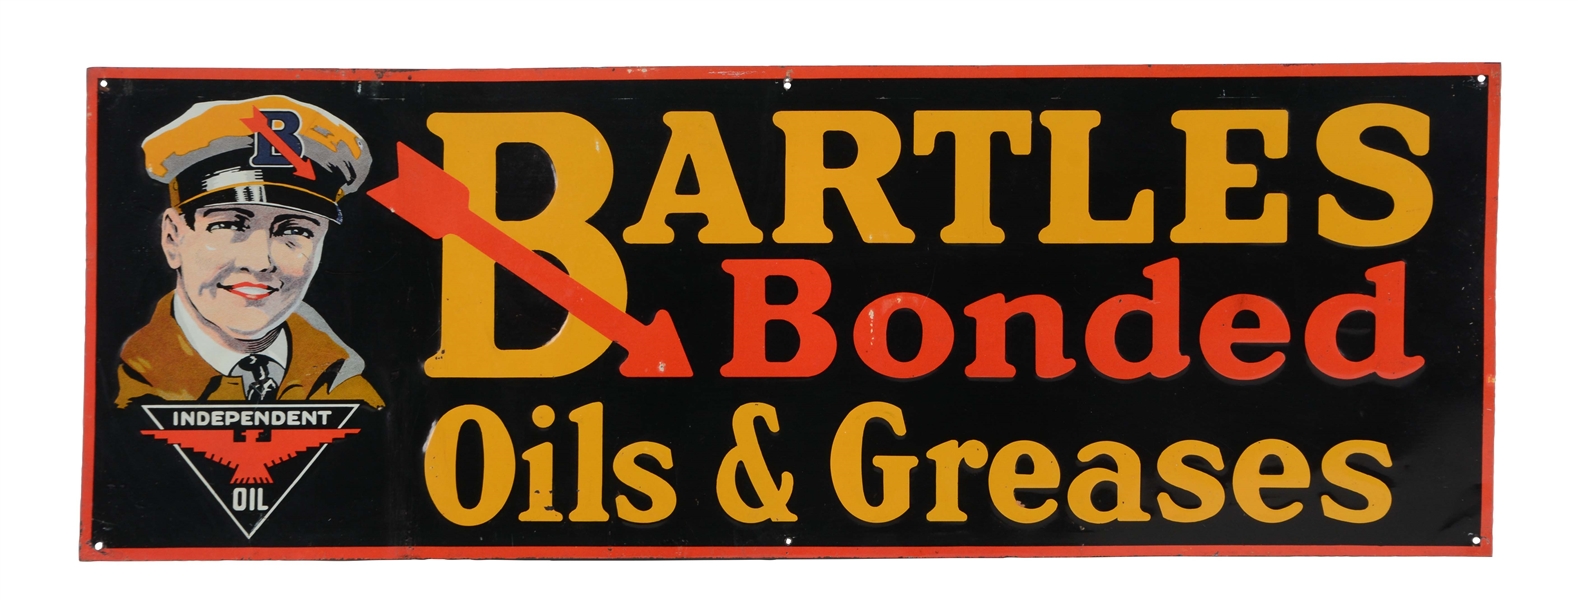 BARTLES BONDED INDEPENDENT OILS & GREASES EMBOSSED TIN SIGN.